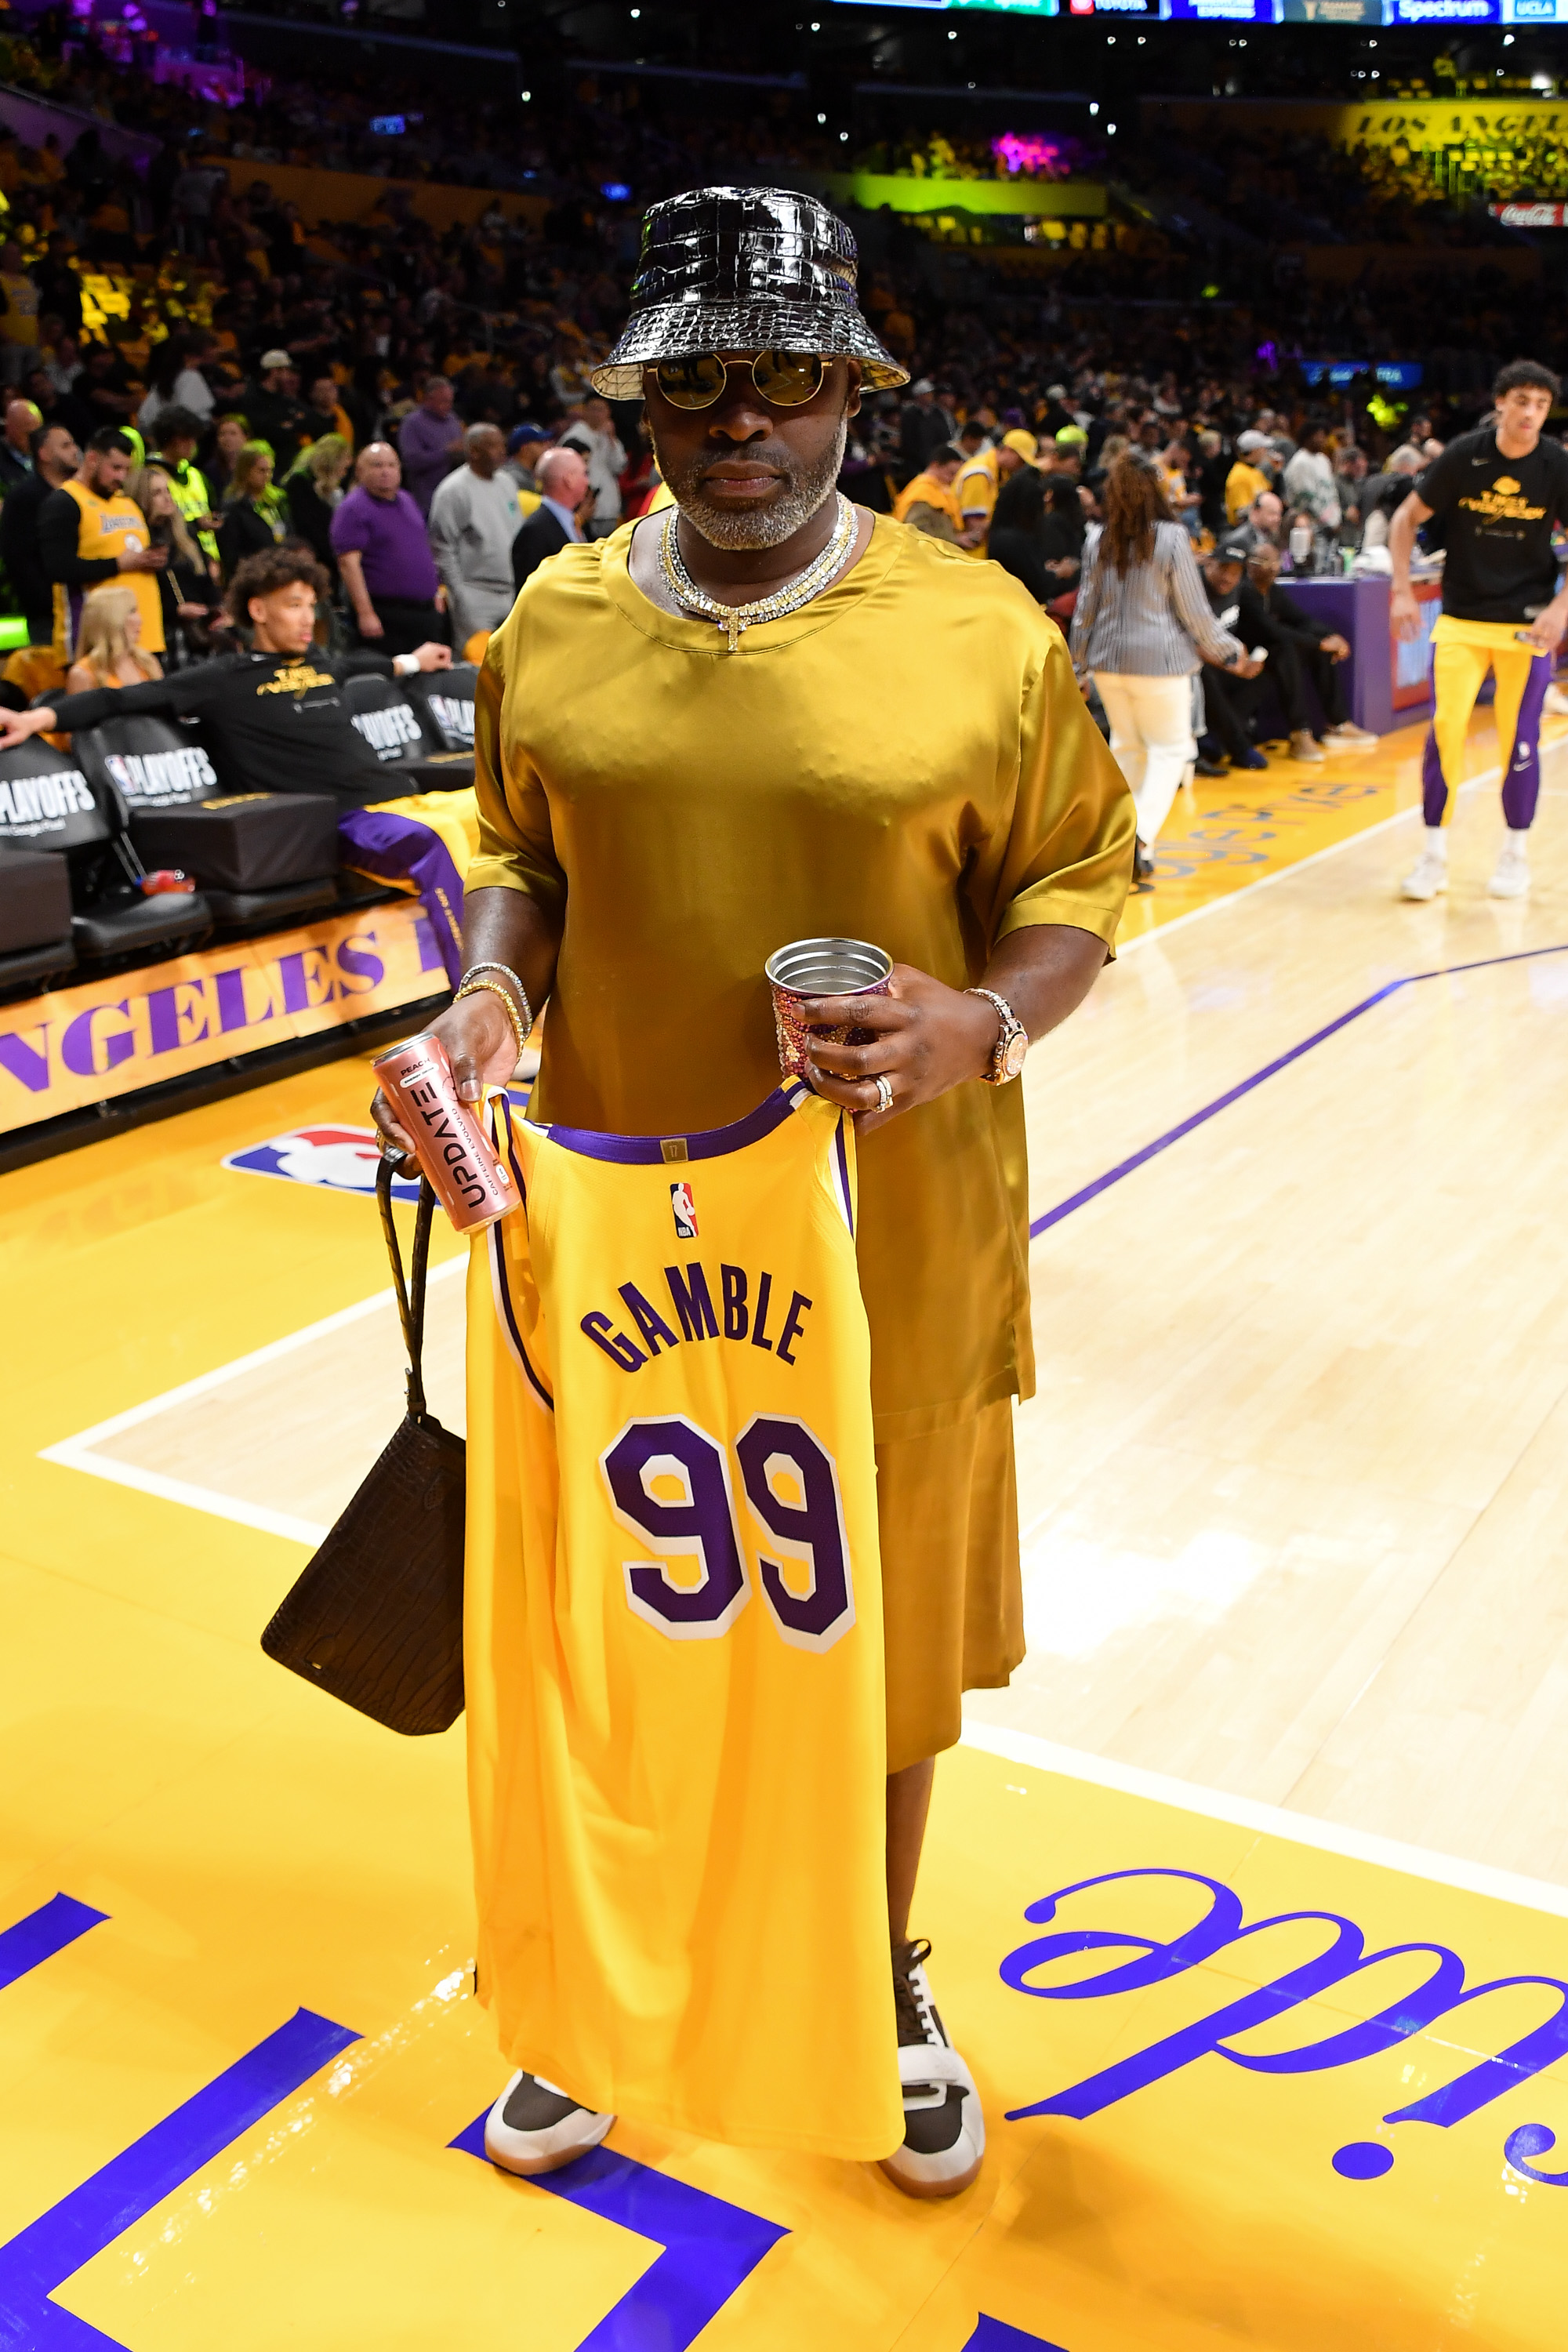 Corey held out his Lakers jersey while standing at the basketball court